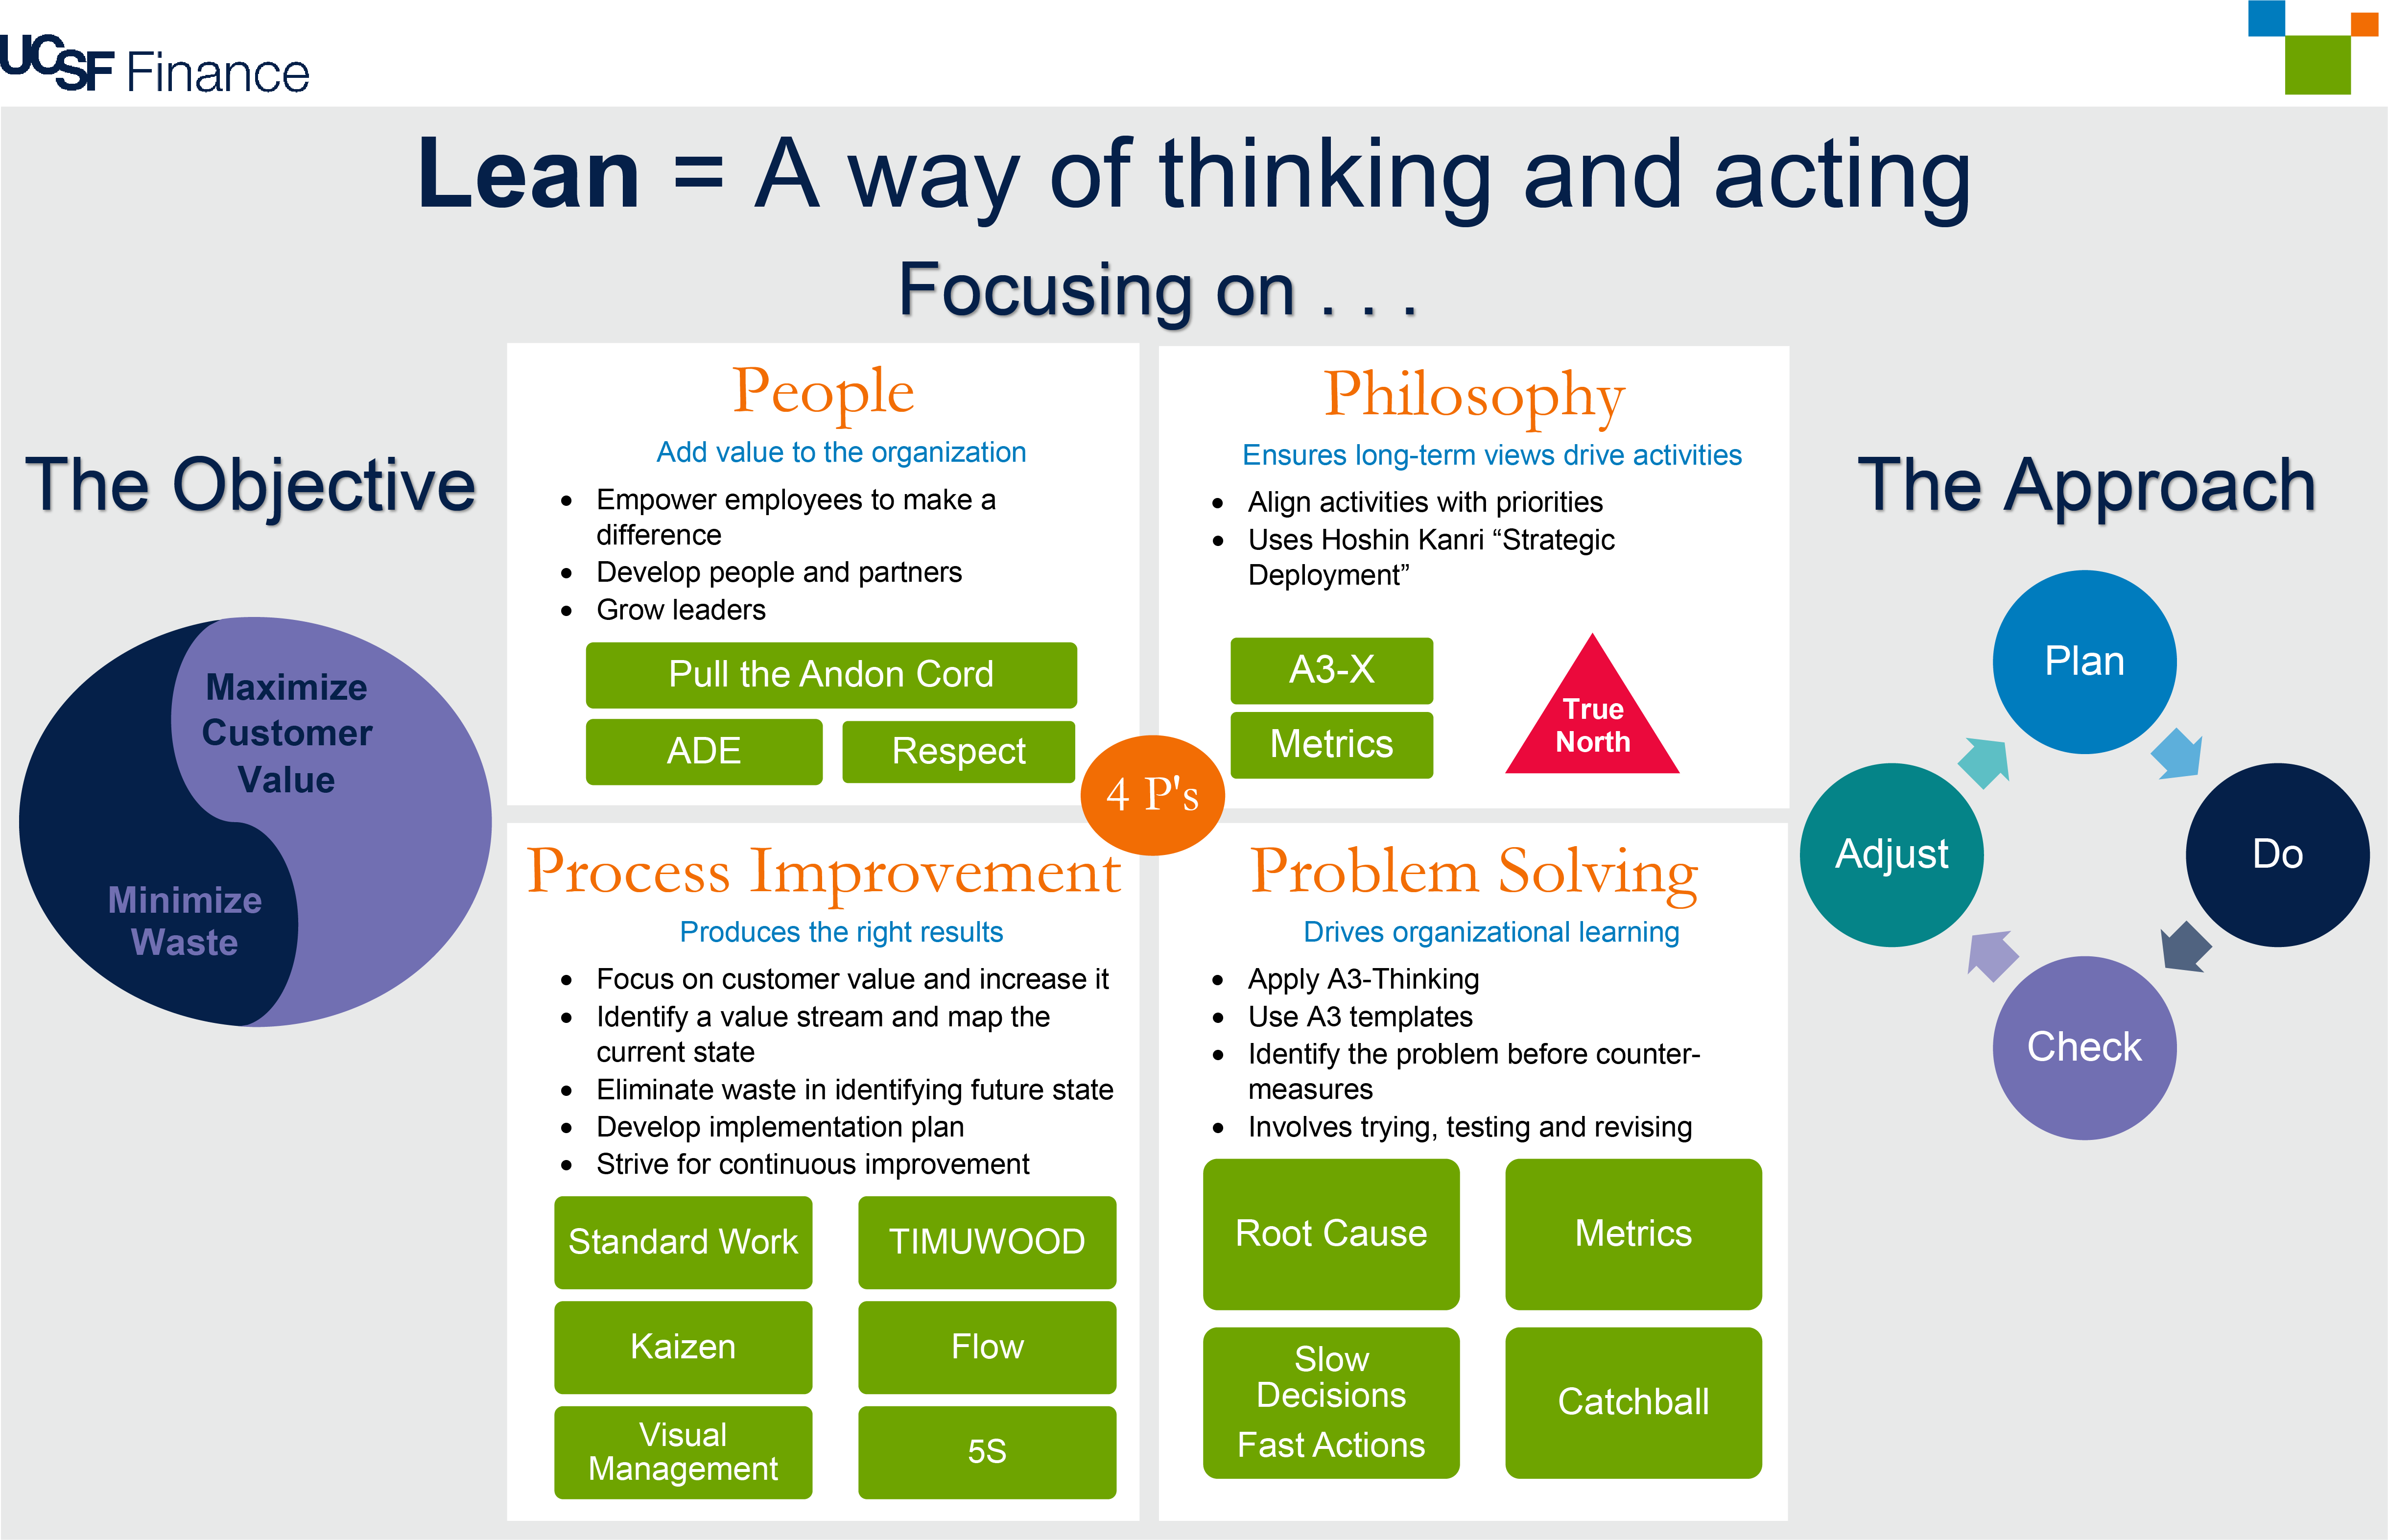 UCSF Finance's Lean approach is to Plan, Do, Check and Adjust, The four principles are People, Philosophy, Problem Solving and Process Improvement. The goal is to maximize customer value while minimizing waste. There is a PDF linked to this for more information.